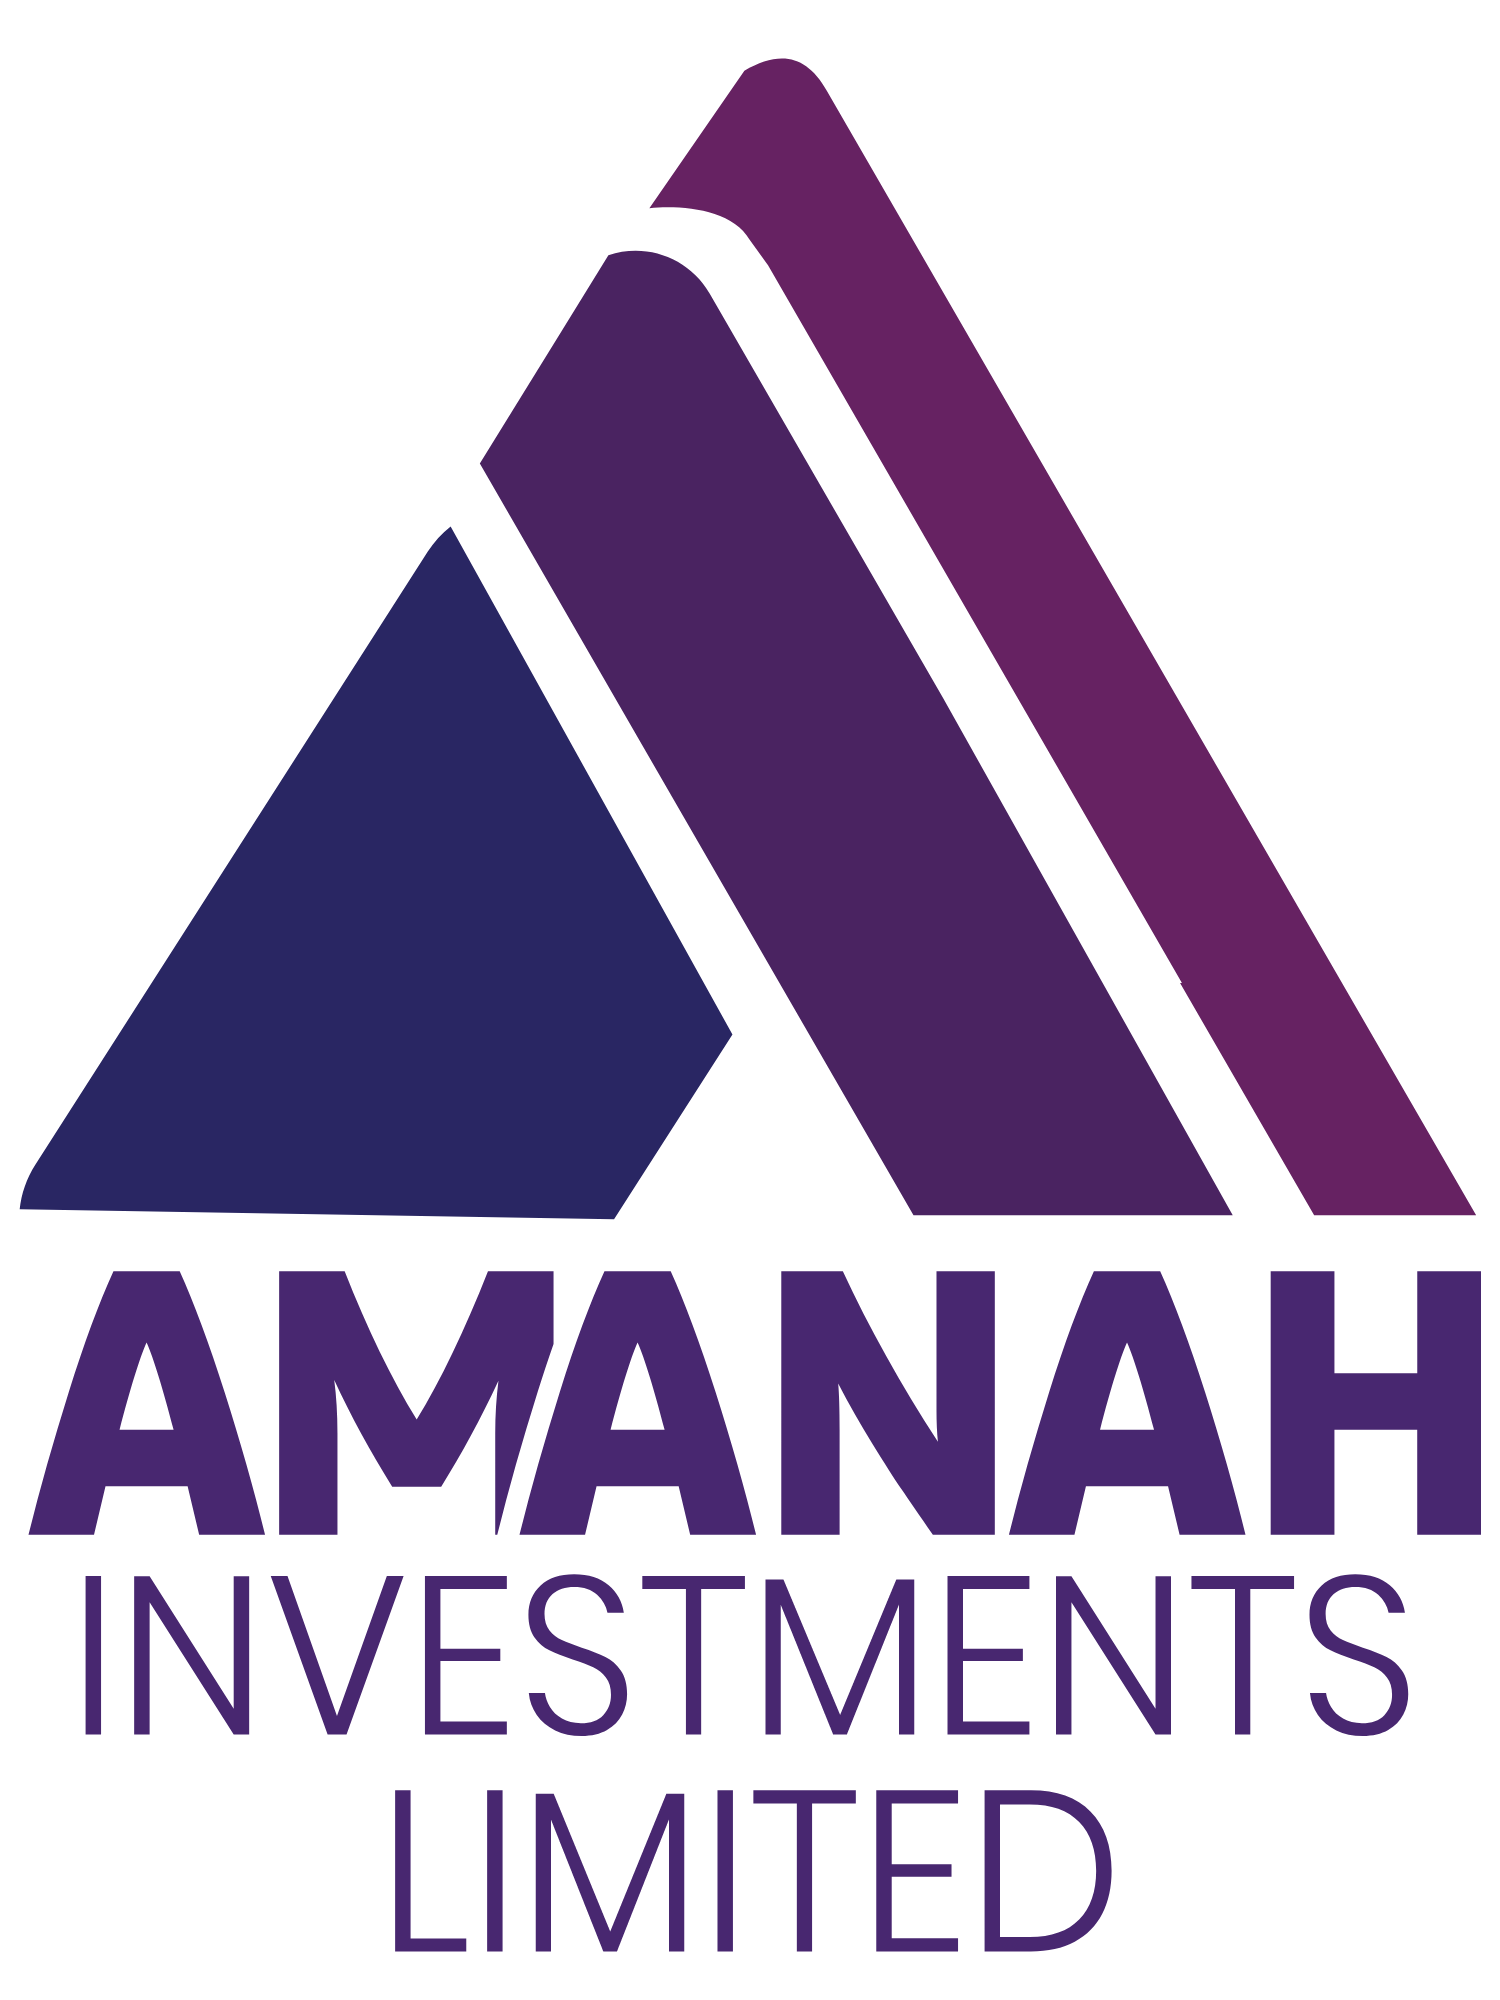 Amanah Investment Limited